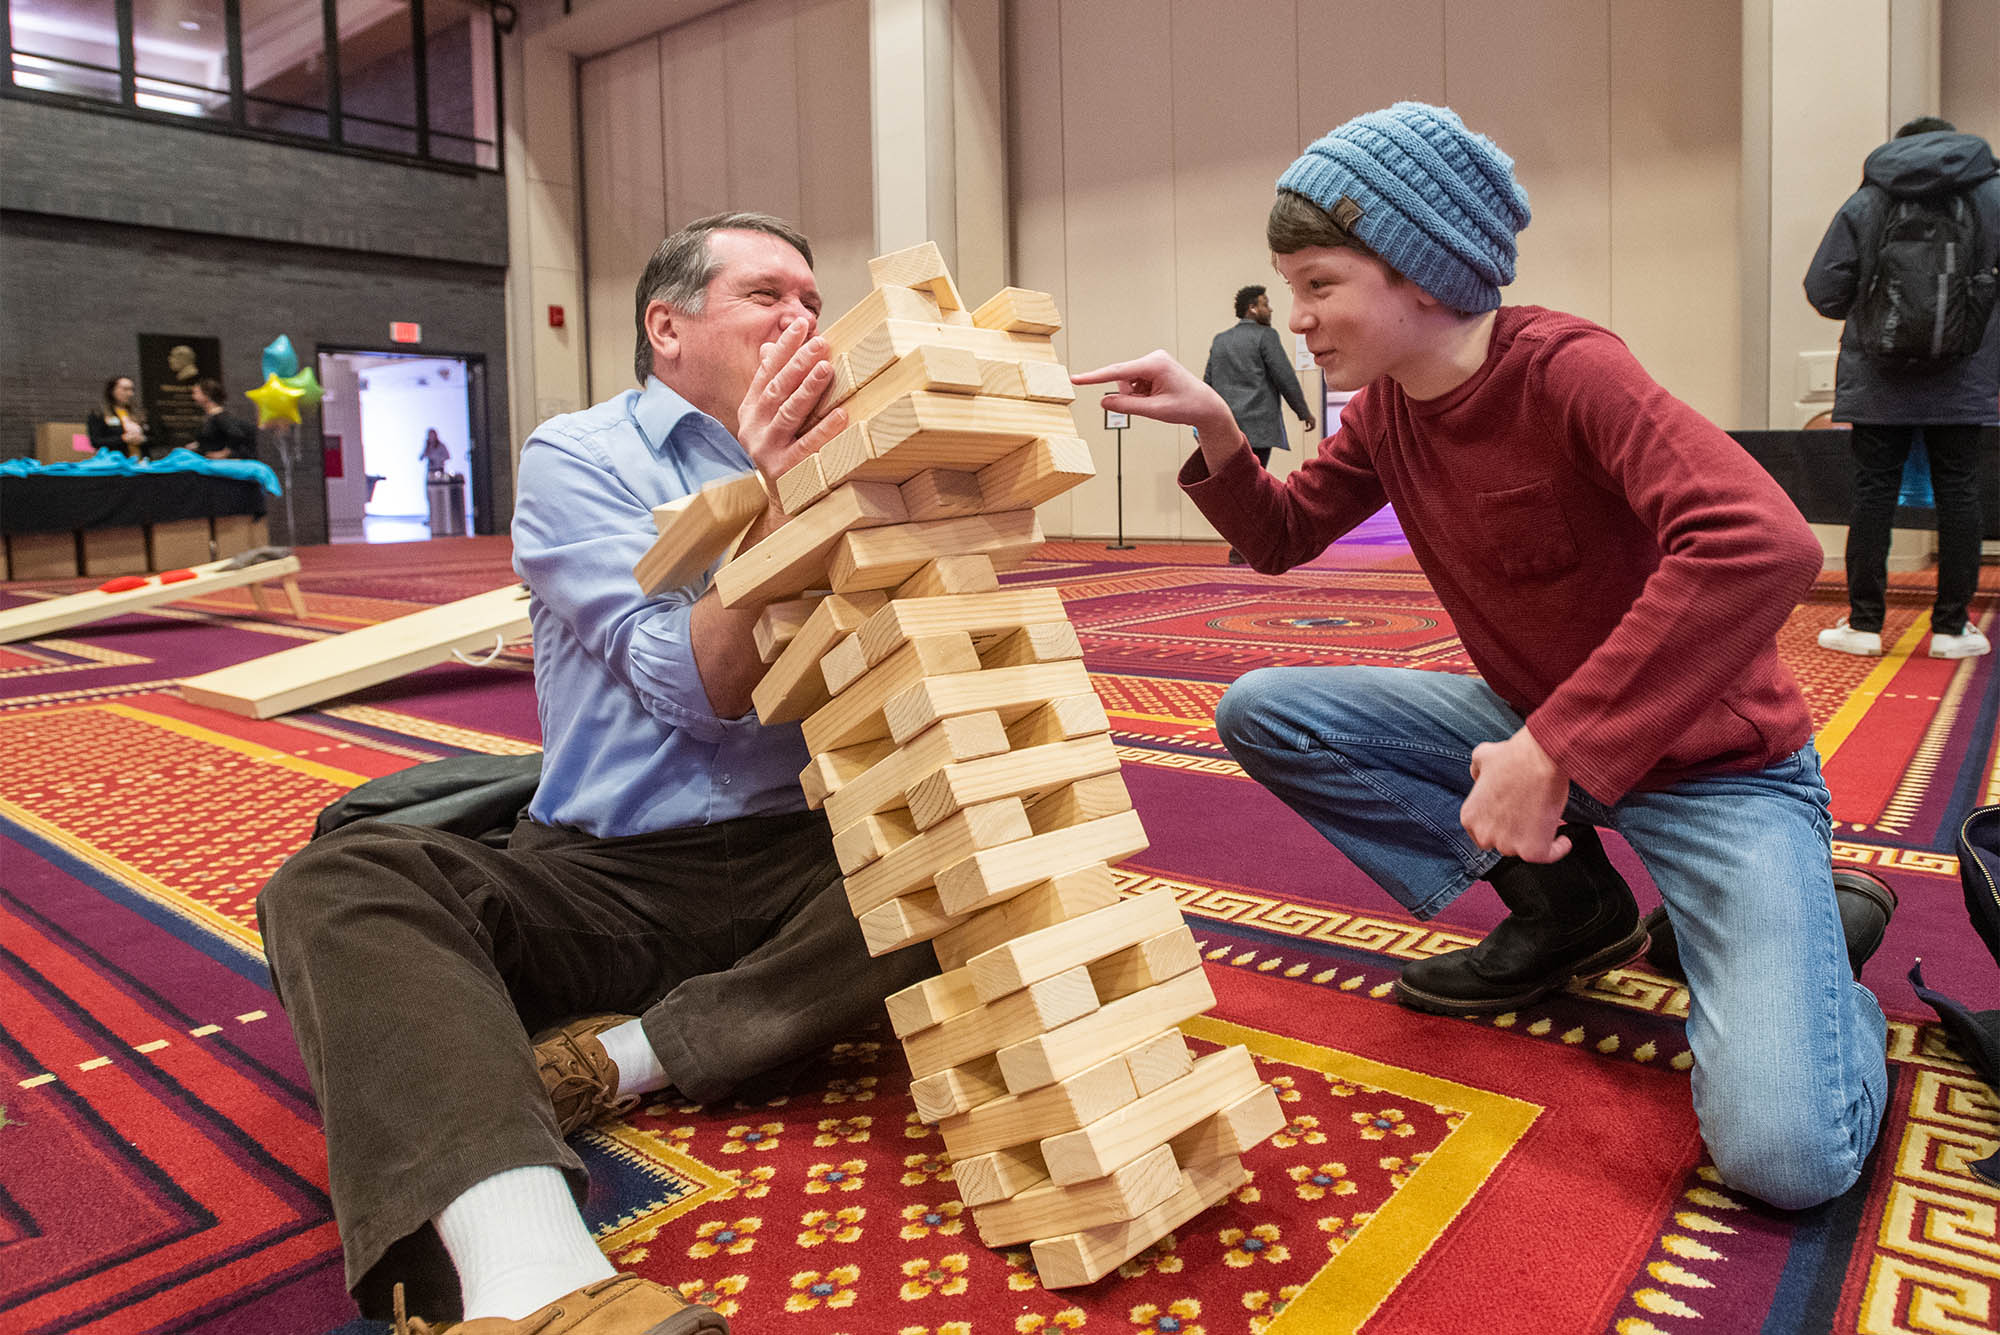 Photo: An older white man wearing a light blue collared shirt and brown pants sits on the carpeted ground next to a young white teen wearing a blue beanie cap, red sweatshirt, and jeans. They both laugh as large Jenga blocks topple towards the older man.